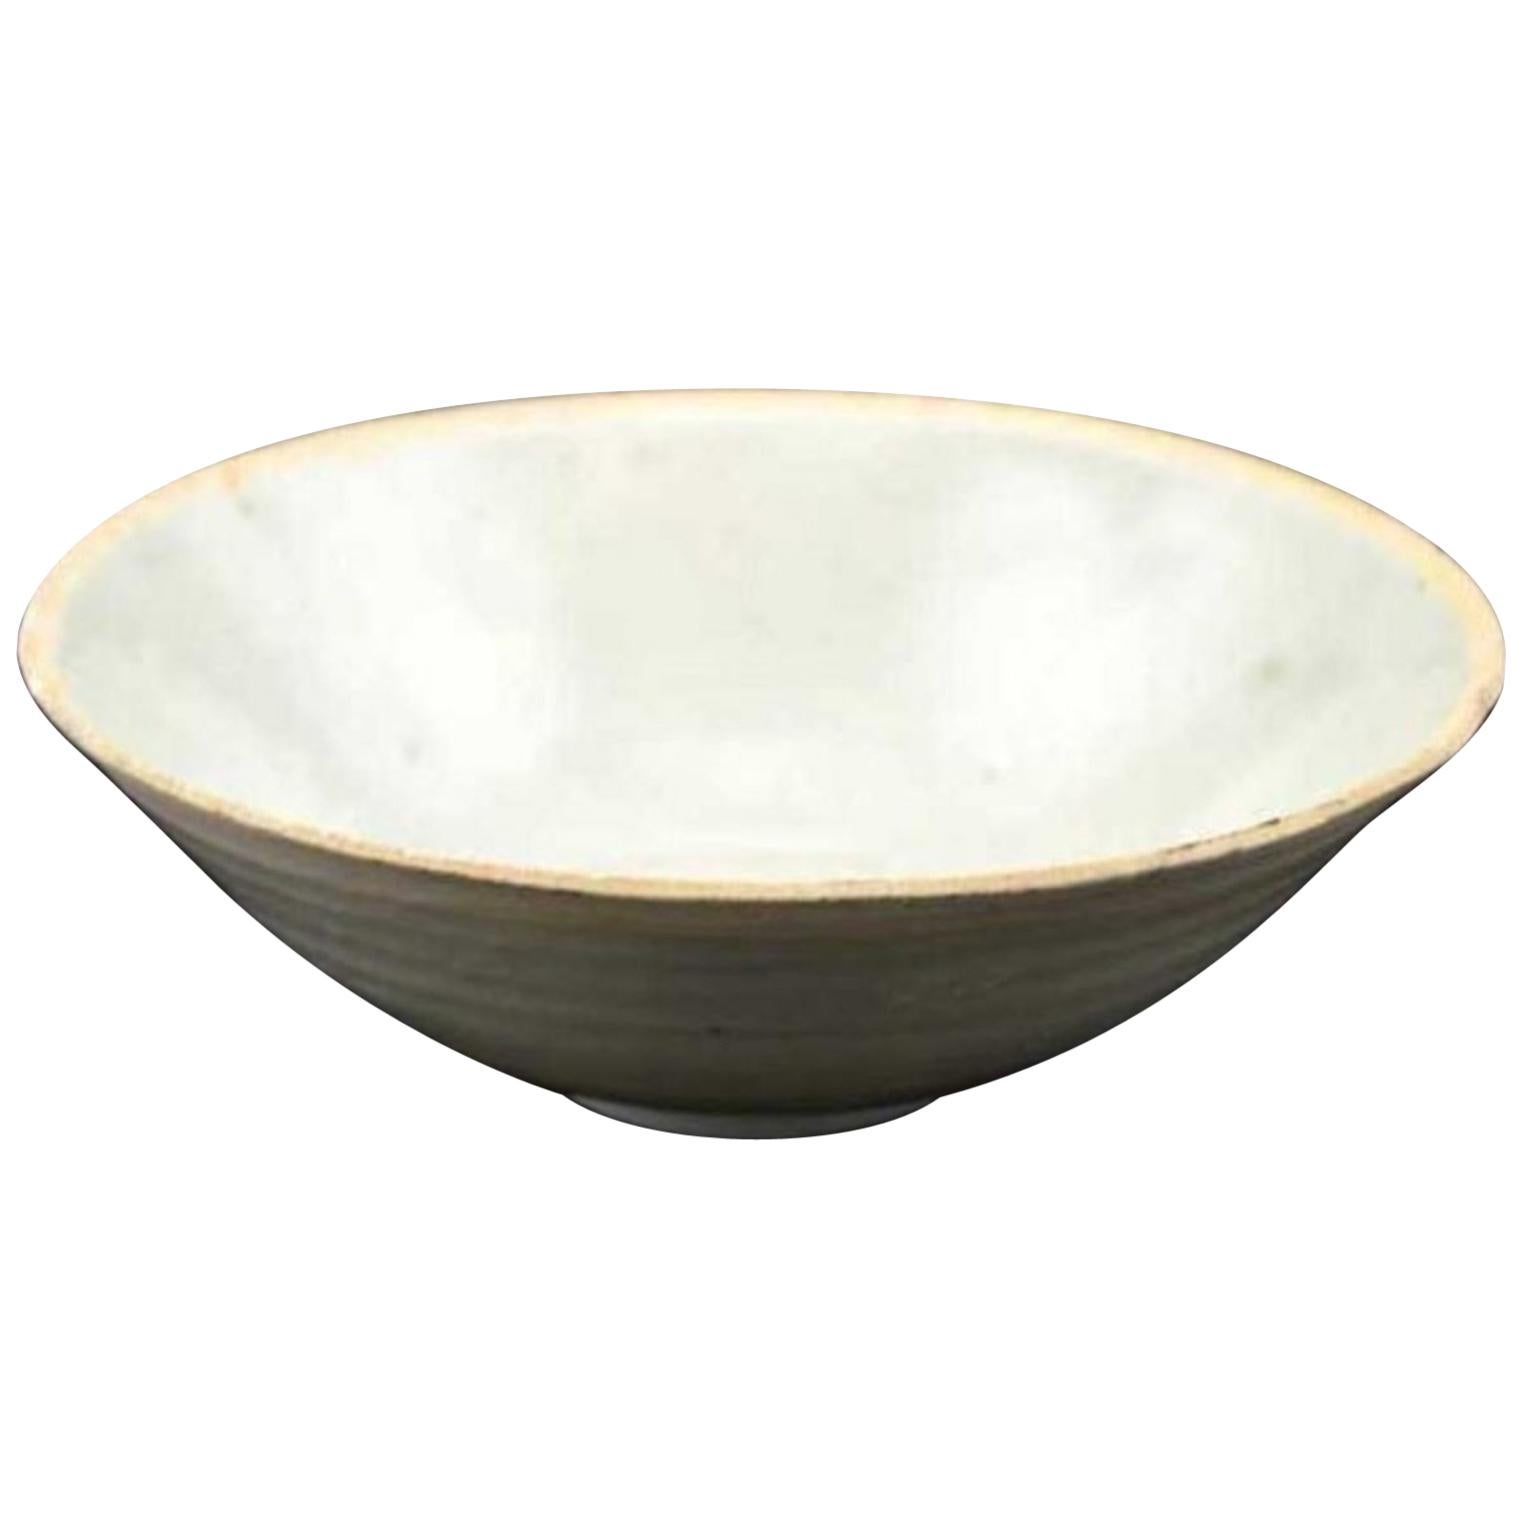 Chinese Rounded Conical Bowl, Song Dynasty